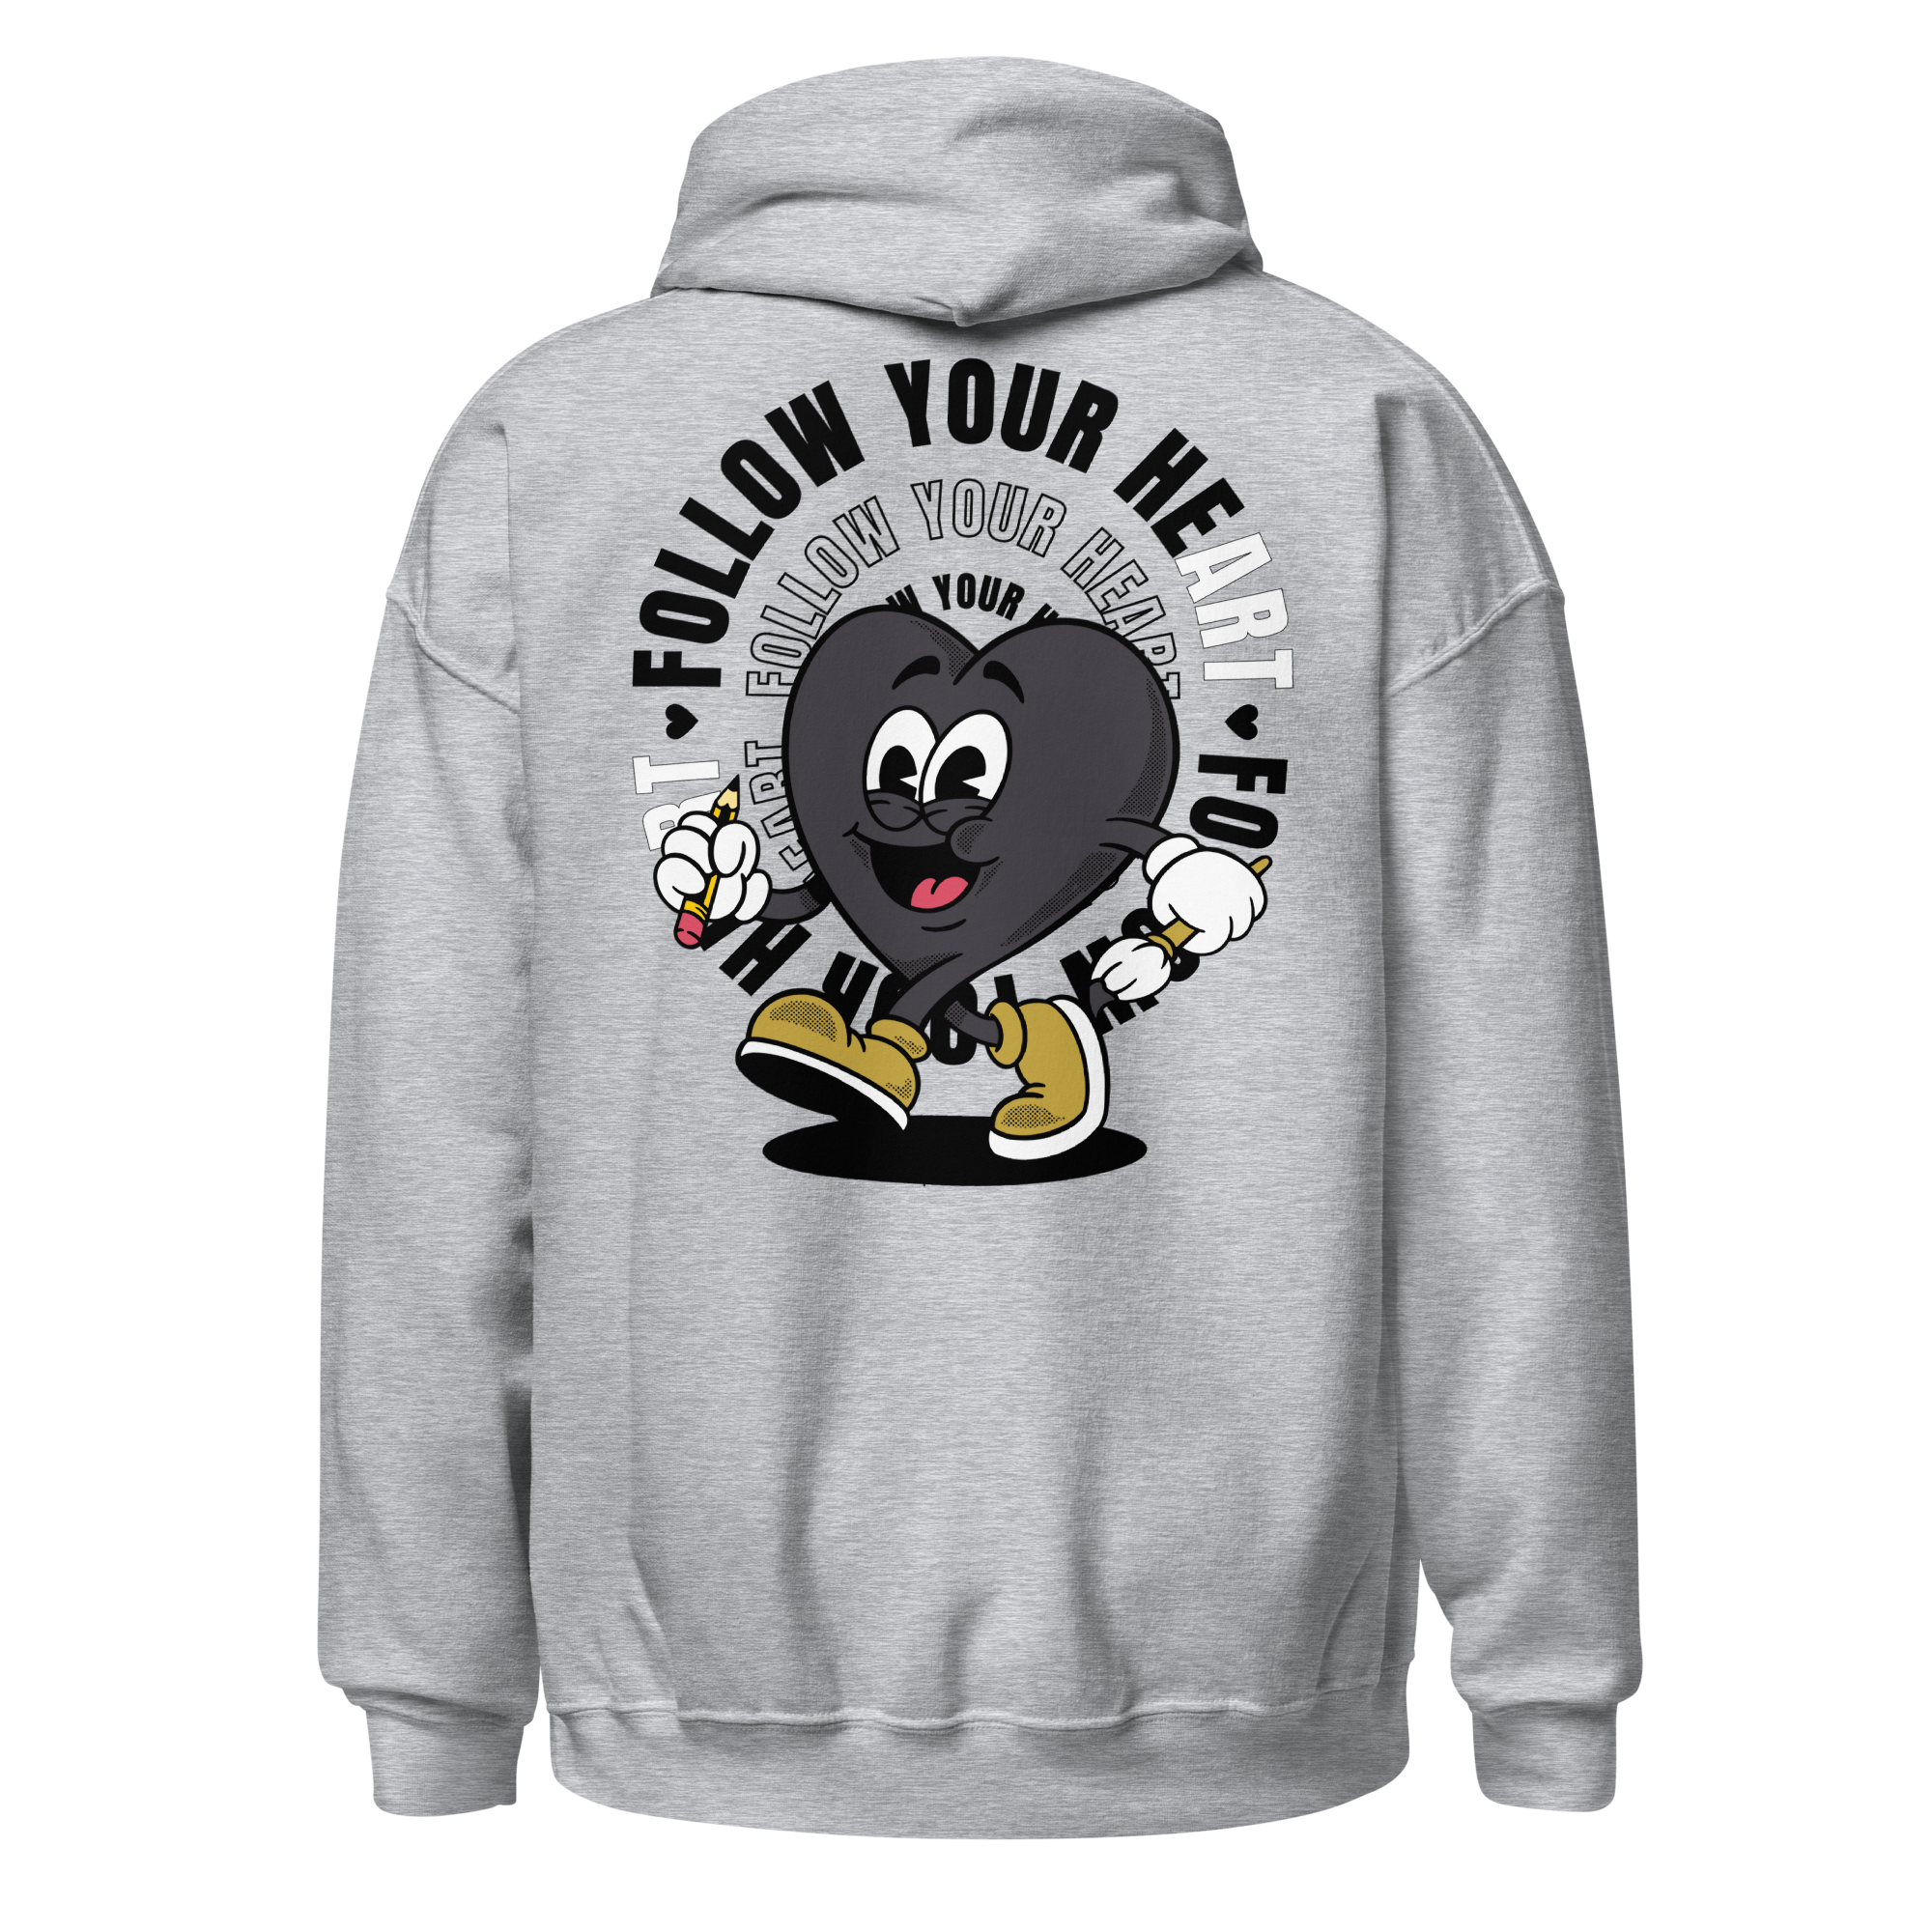 Follow Your Heart Embroidery Hoodie - Black and Gray (Unisex)